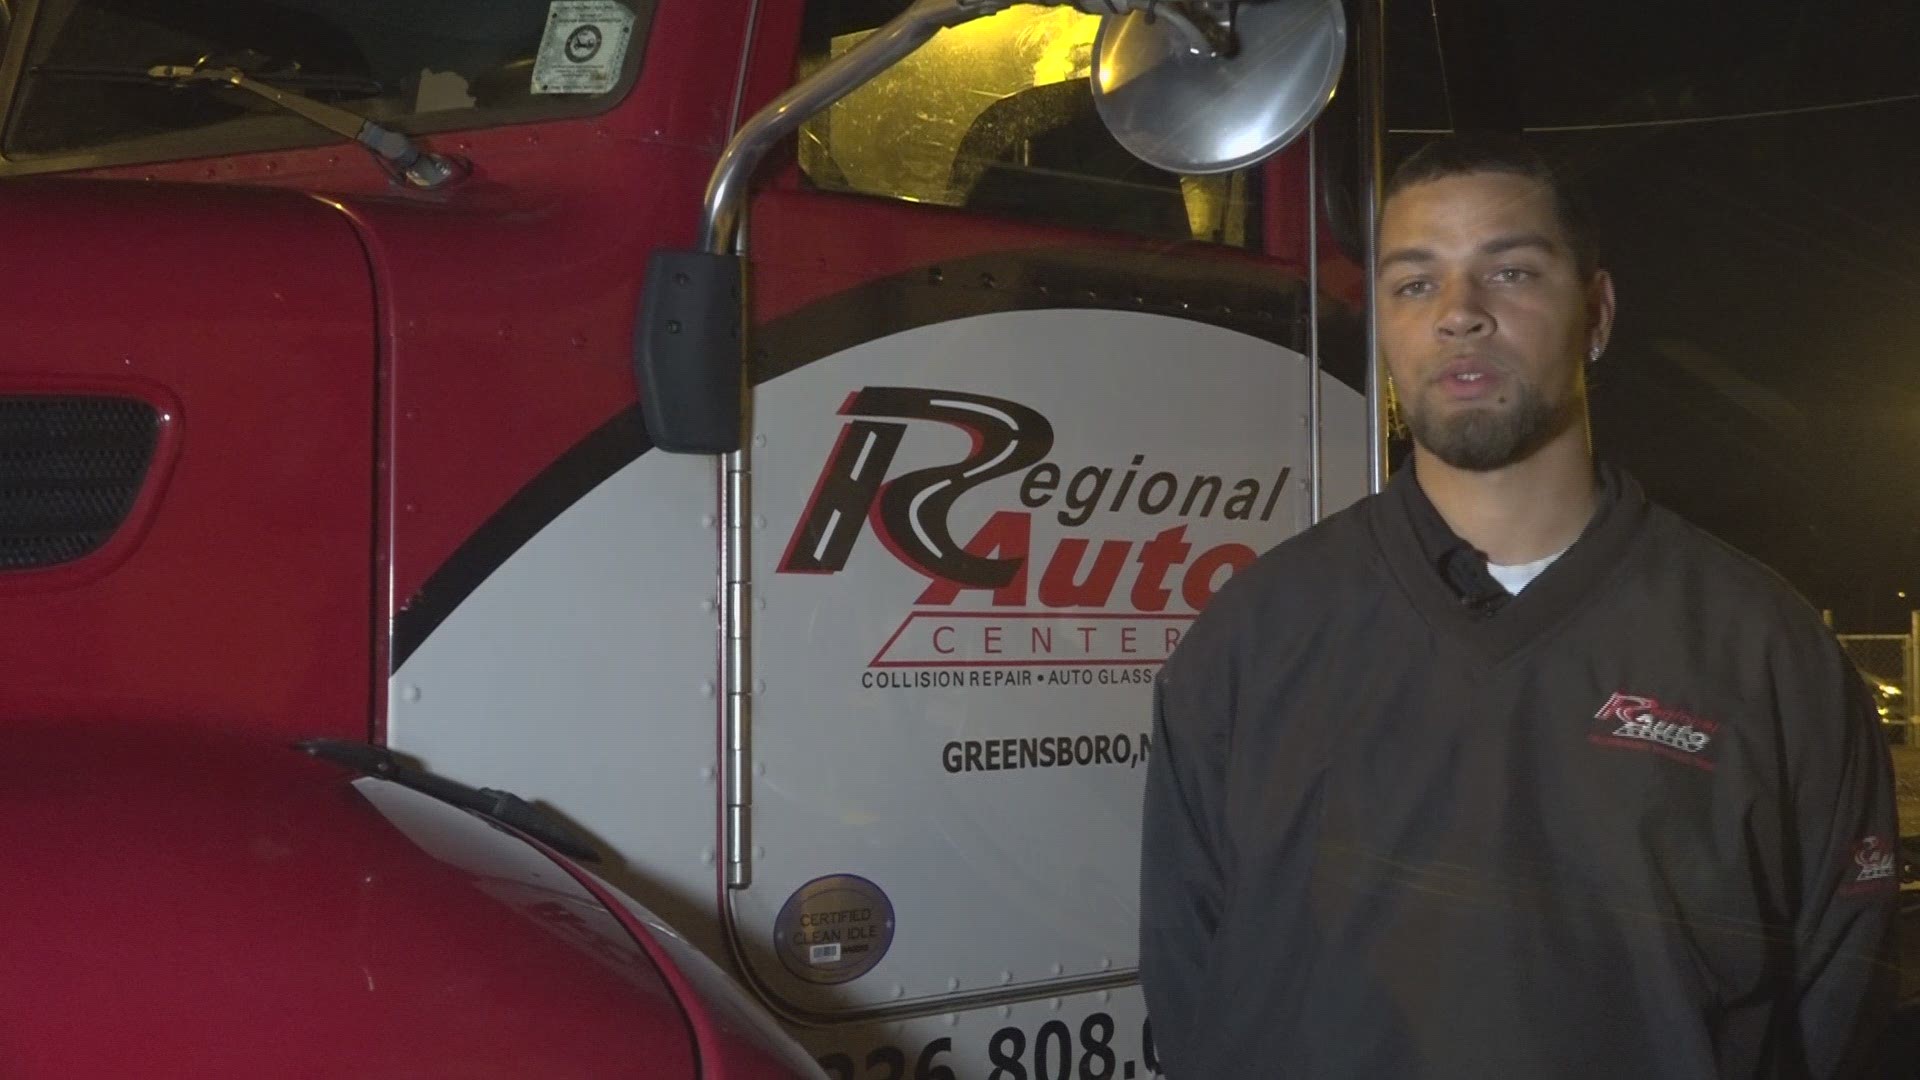 When operator Shawn Scott heard about the death of fellow driver Benny Sprinkles in Surry County, he was heartbroken. Now, he wants leaders to take action to make it safer for tow truck operators.